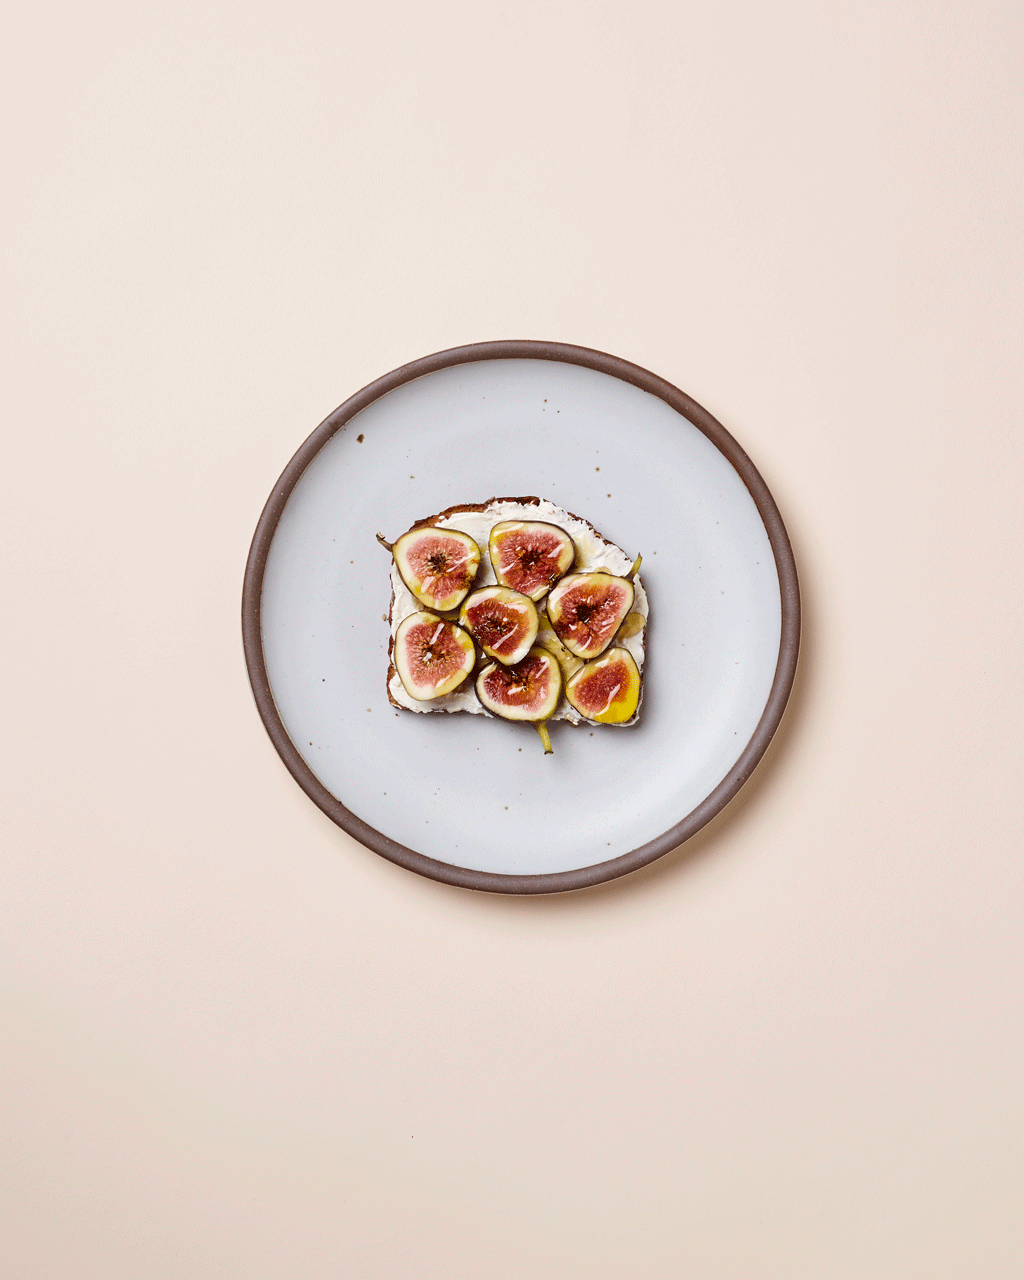 Stop motion gif of Dinner Plate plated with Figs on Toast that gets a bite taken out of it frame-by-frame